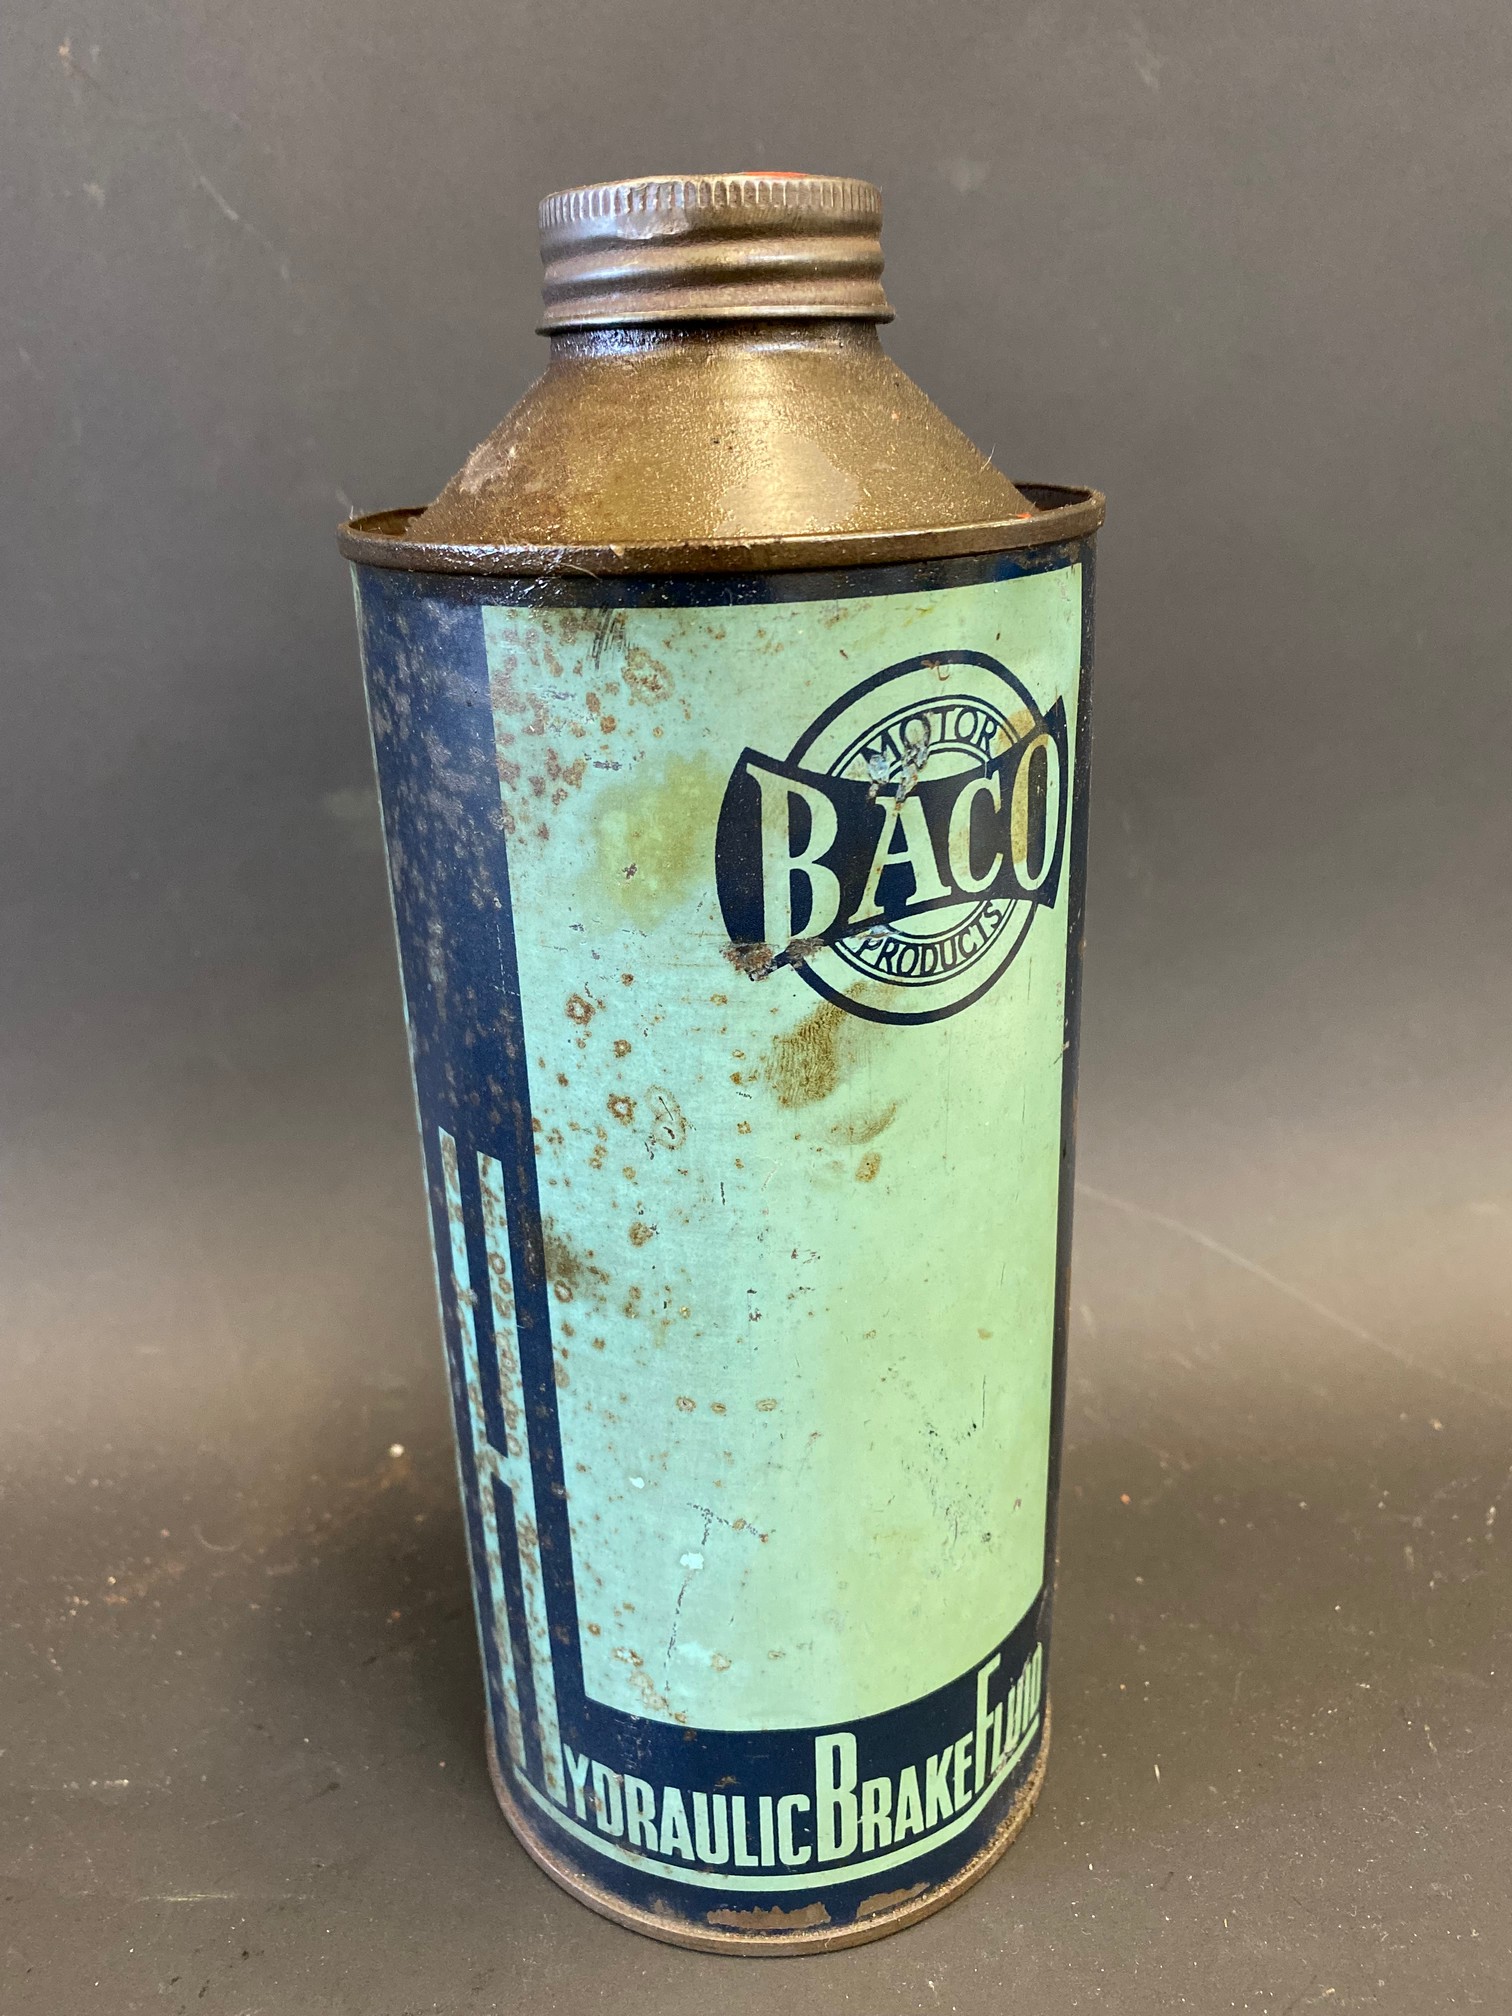 A BACO Hydraulic Brake Fluid cylindrical quart can. - Image 2 of 4